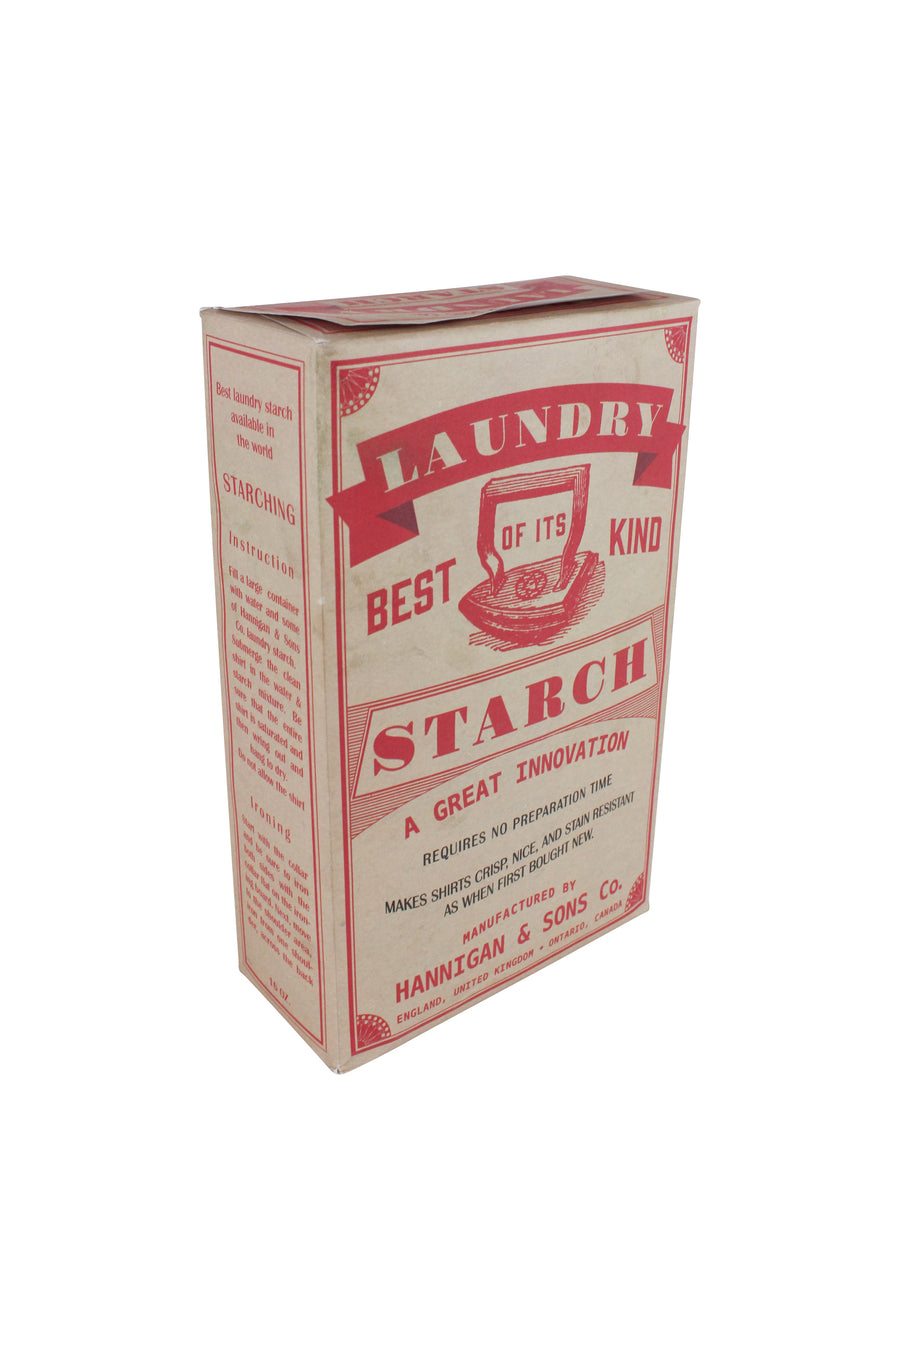 Laundry Starch Boxes